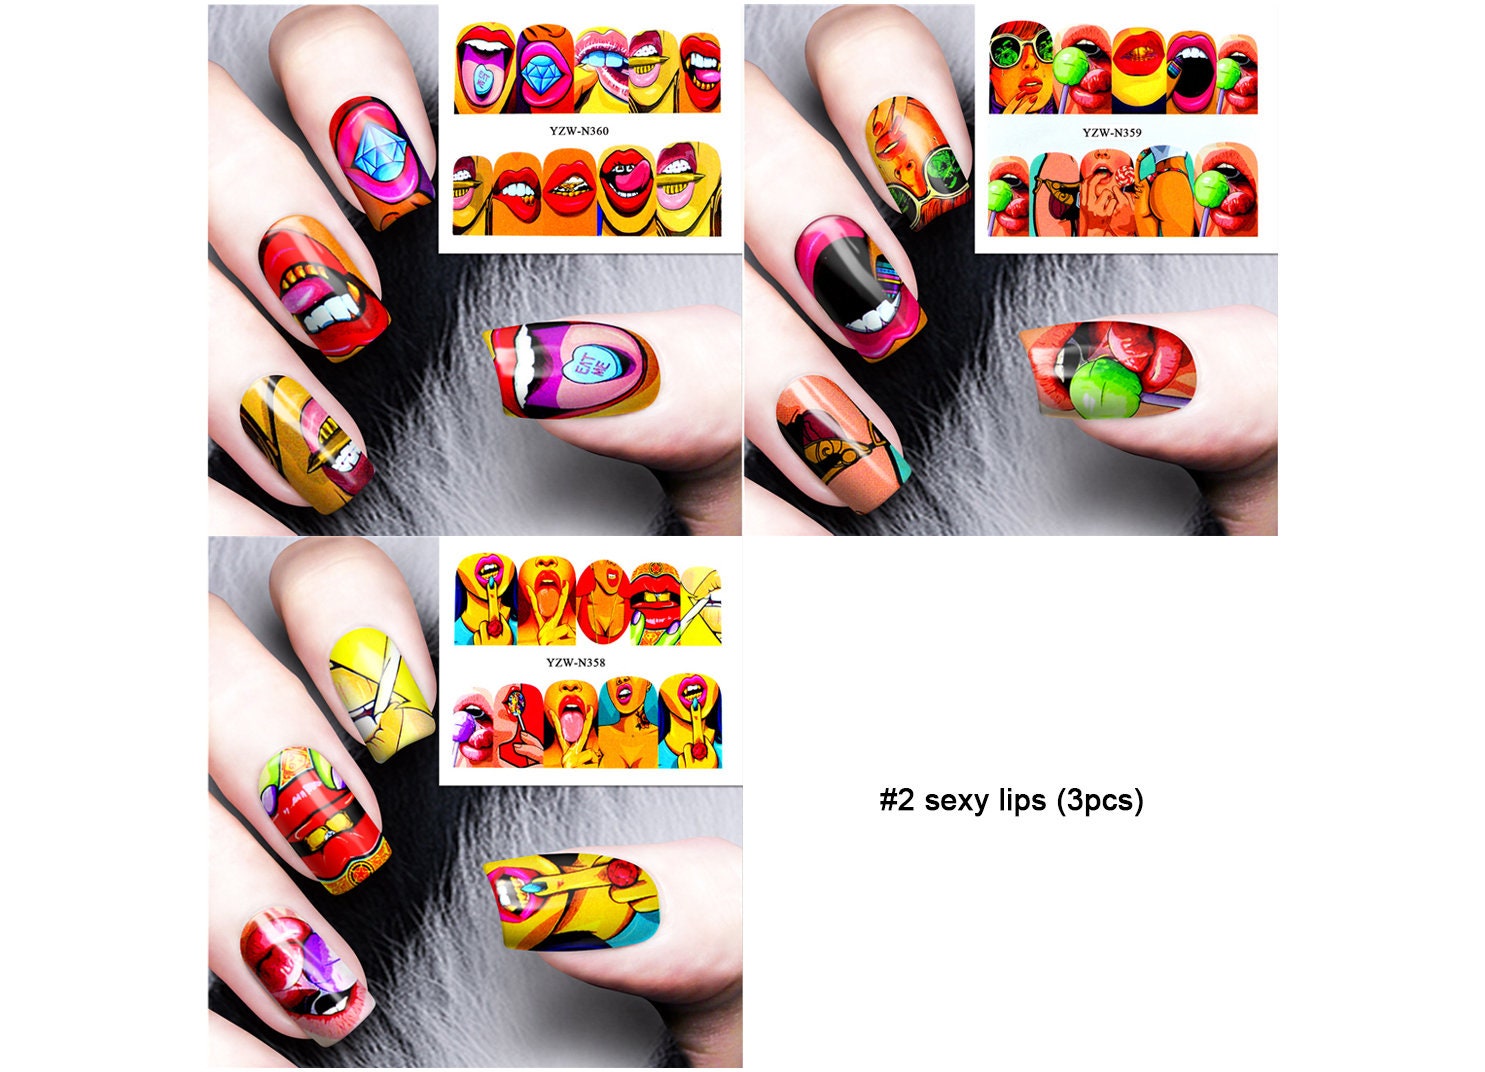 Nail Art Stickers Are Officially Cooler Than Nail Polish